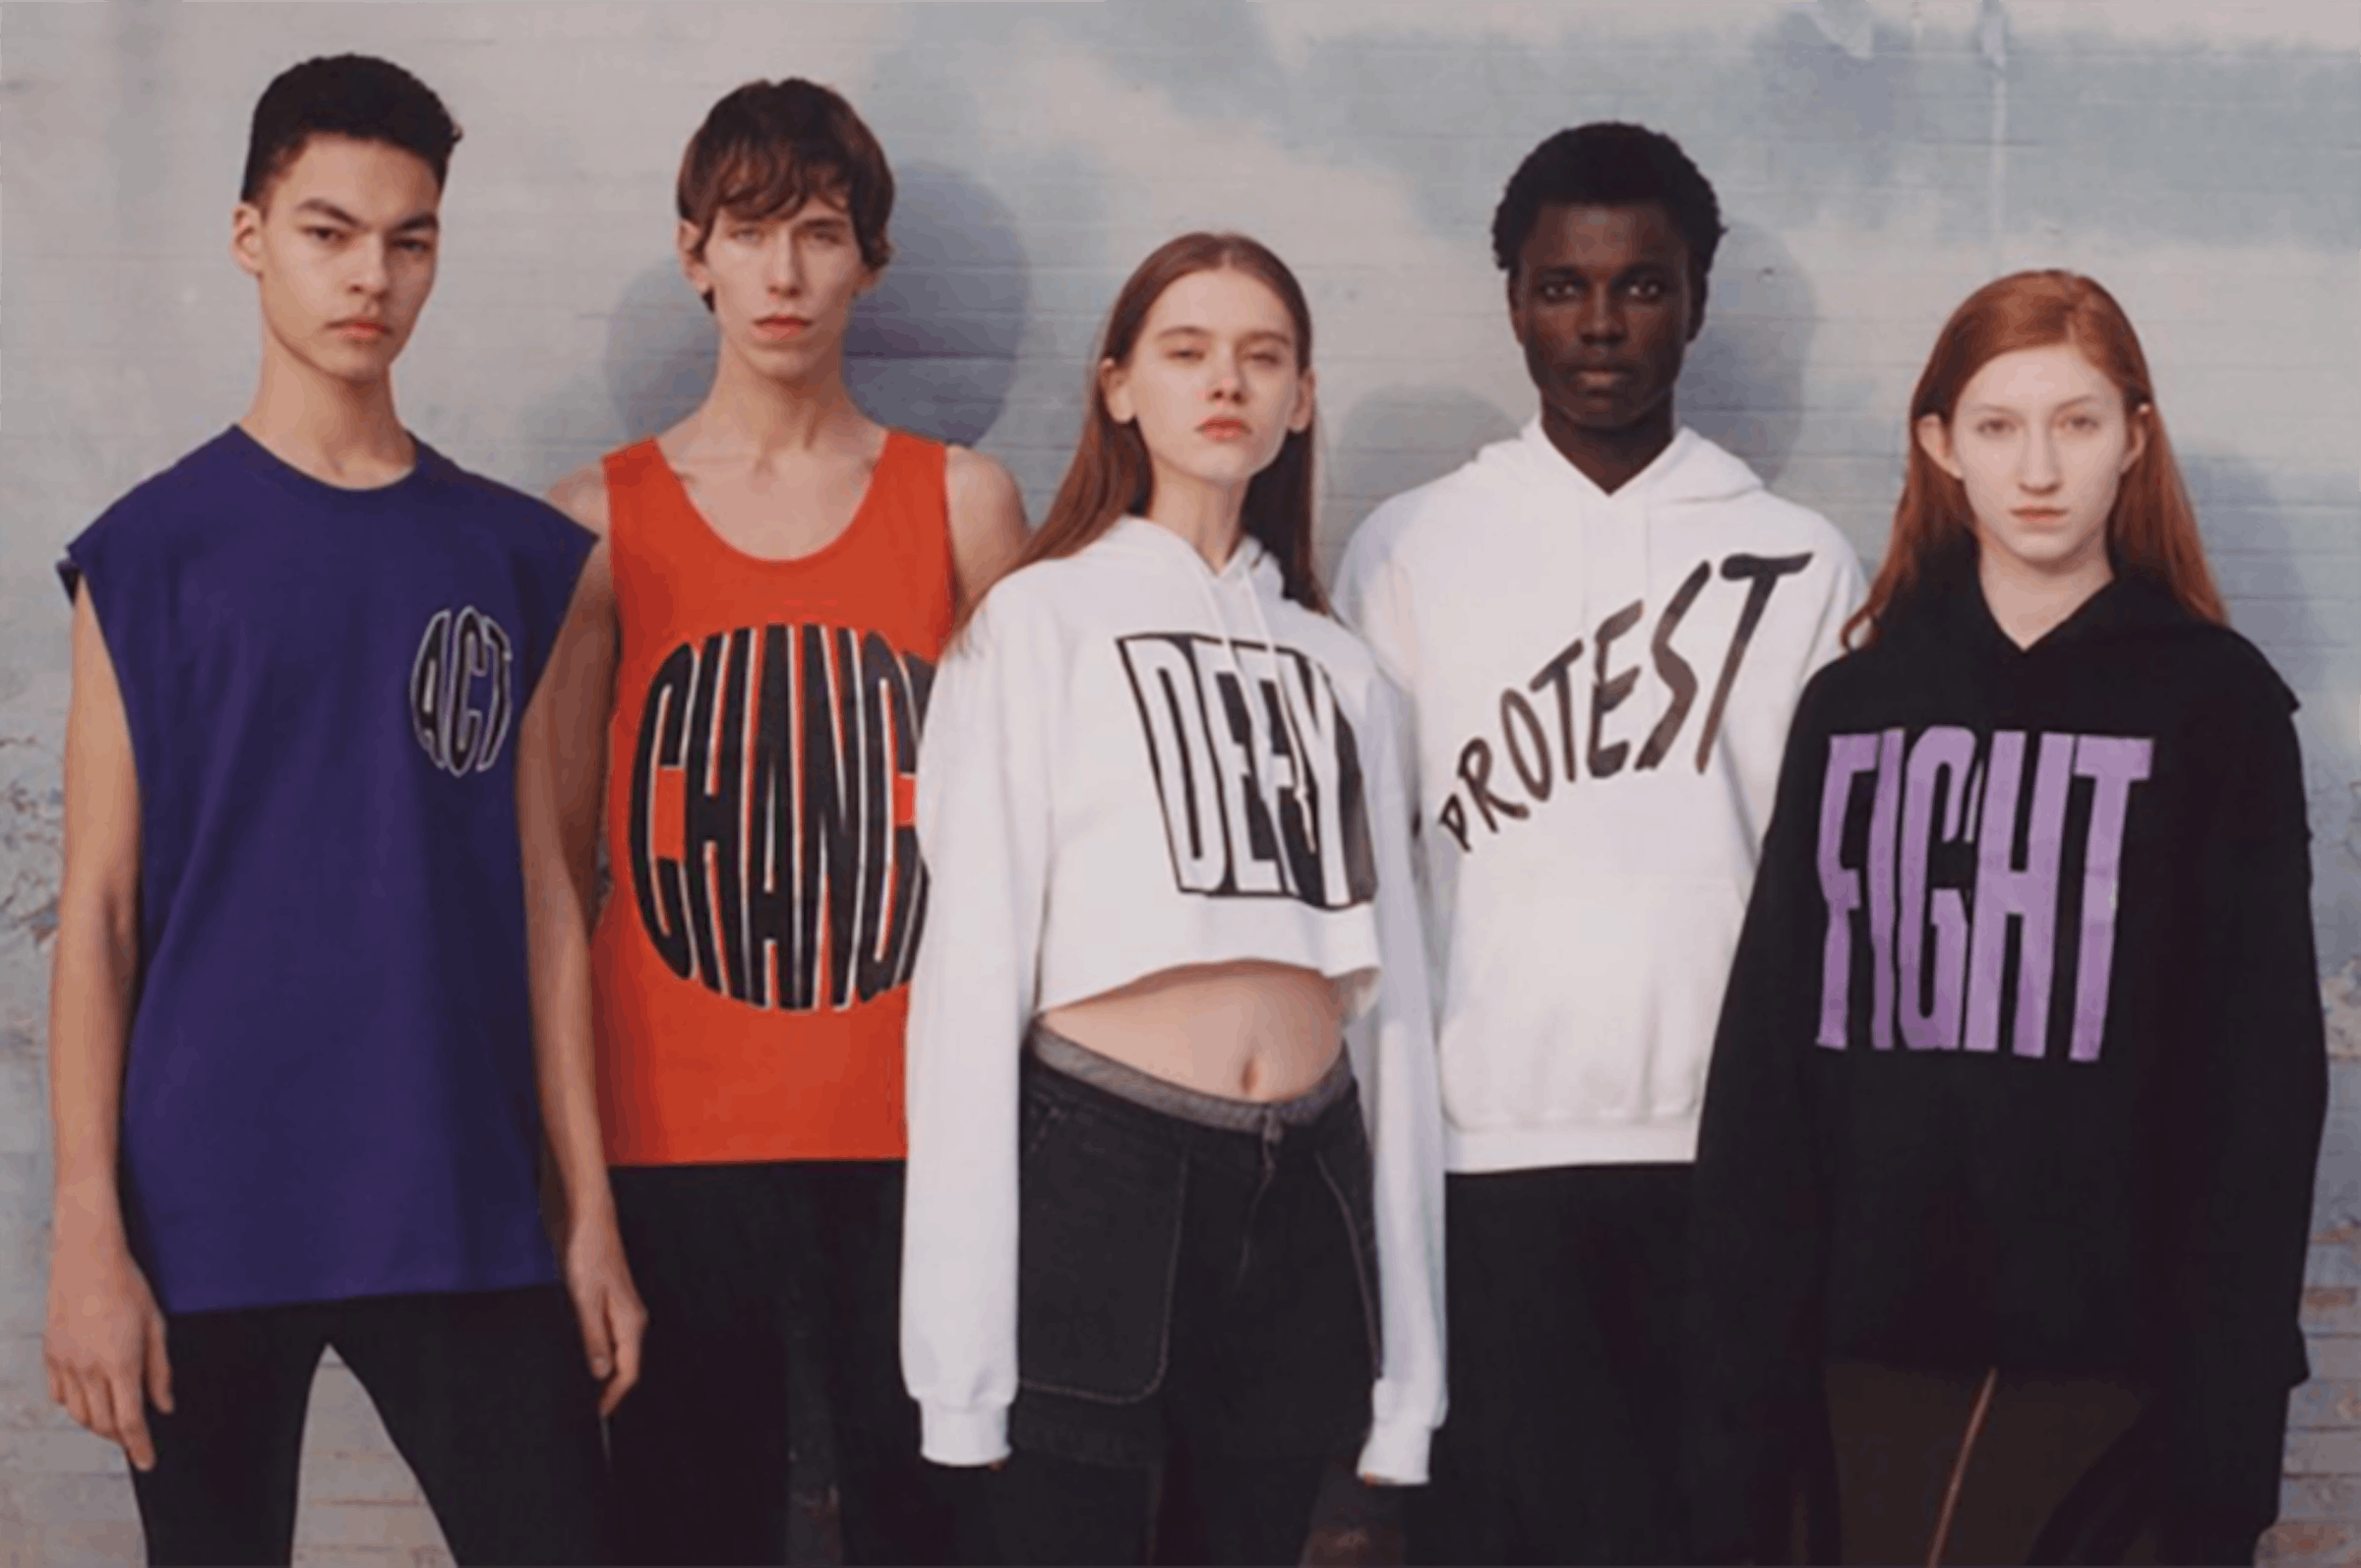 Opening Ceremony Teams Up With NYC Ballet For Their Latest Capsule